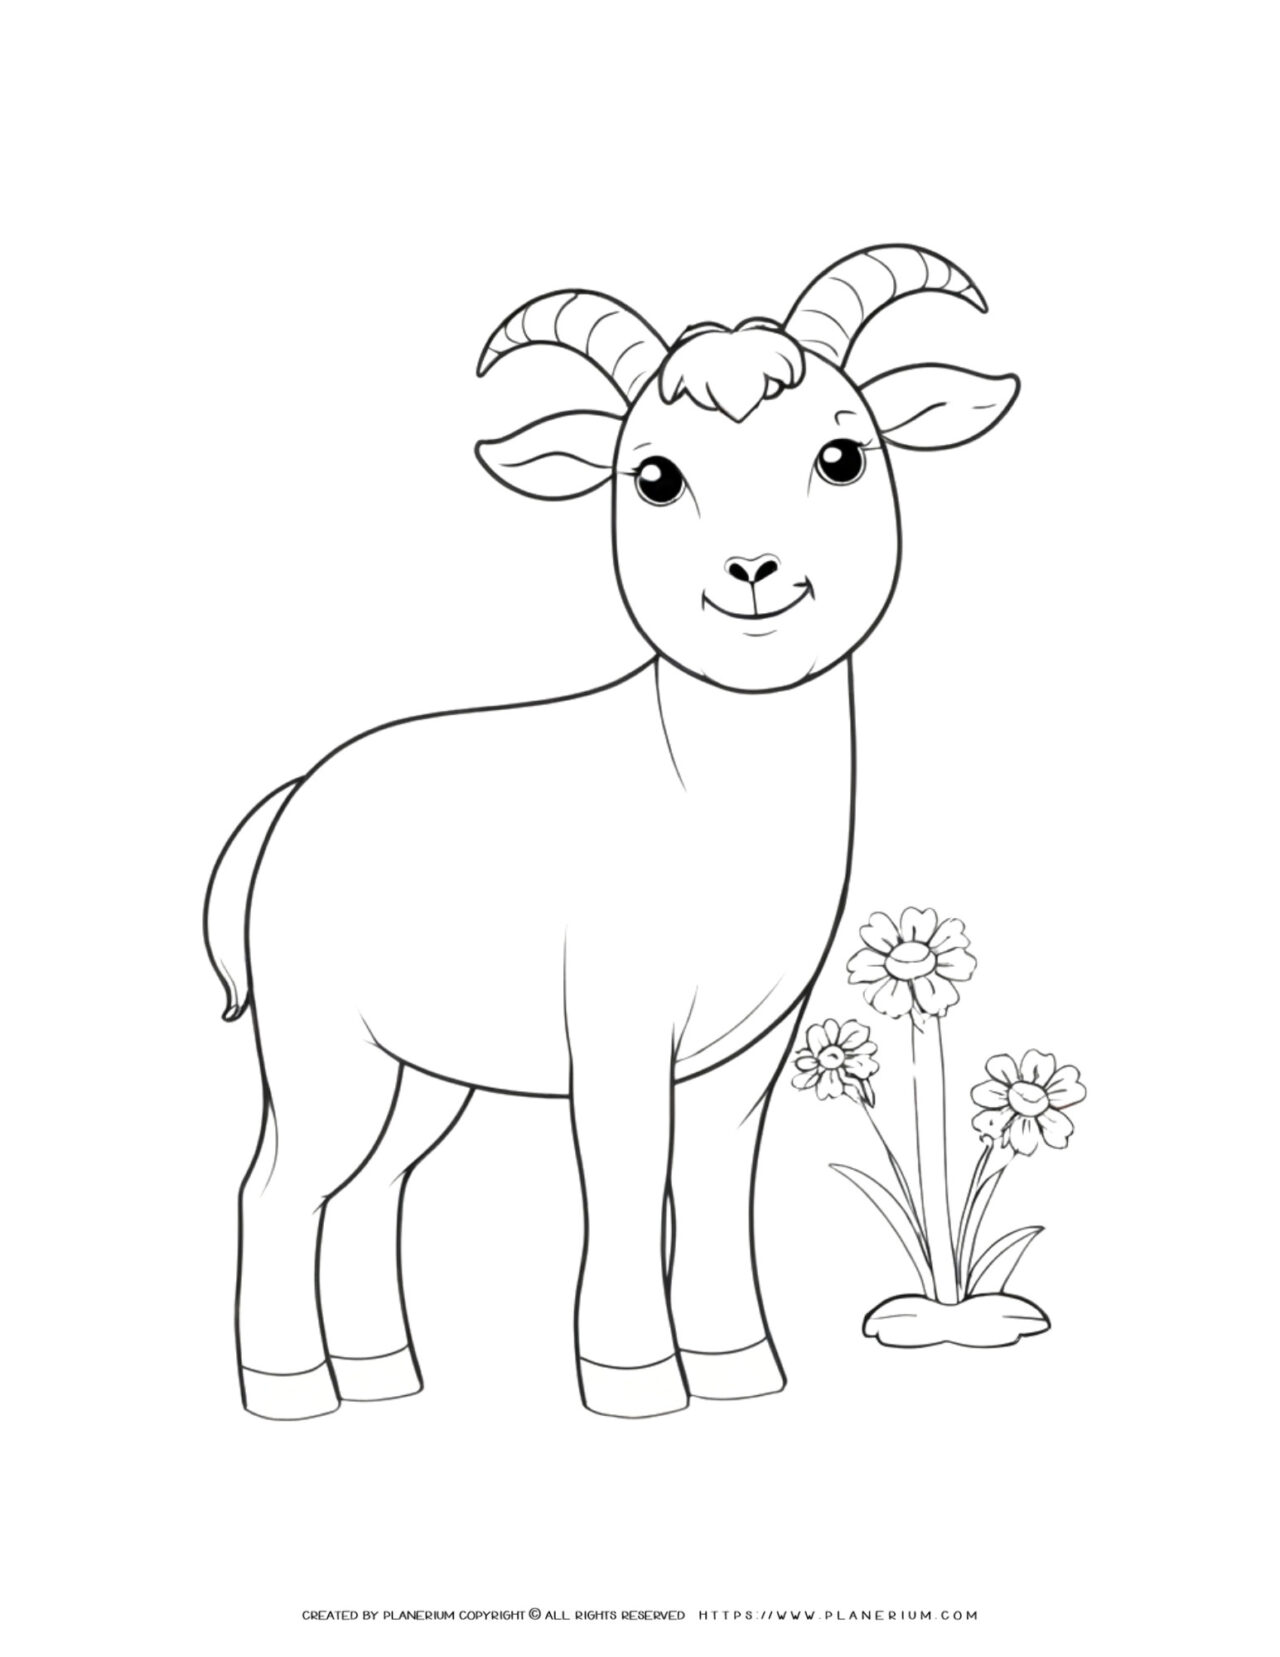 Cute-Goat-with-Flowers-Simple-Coloring-Page